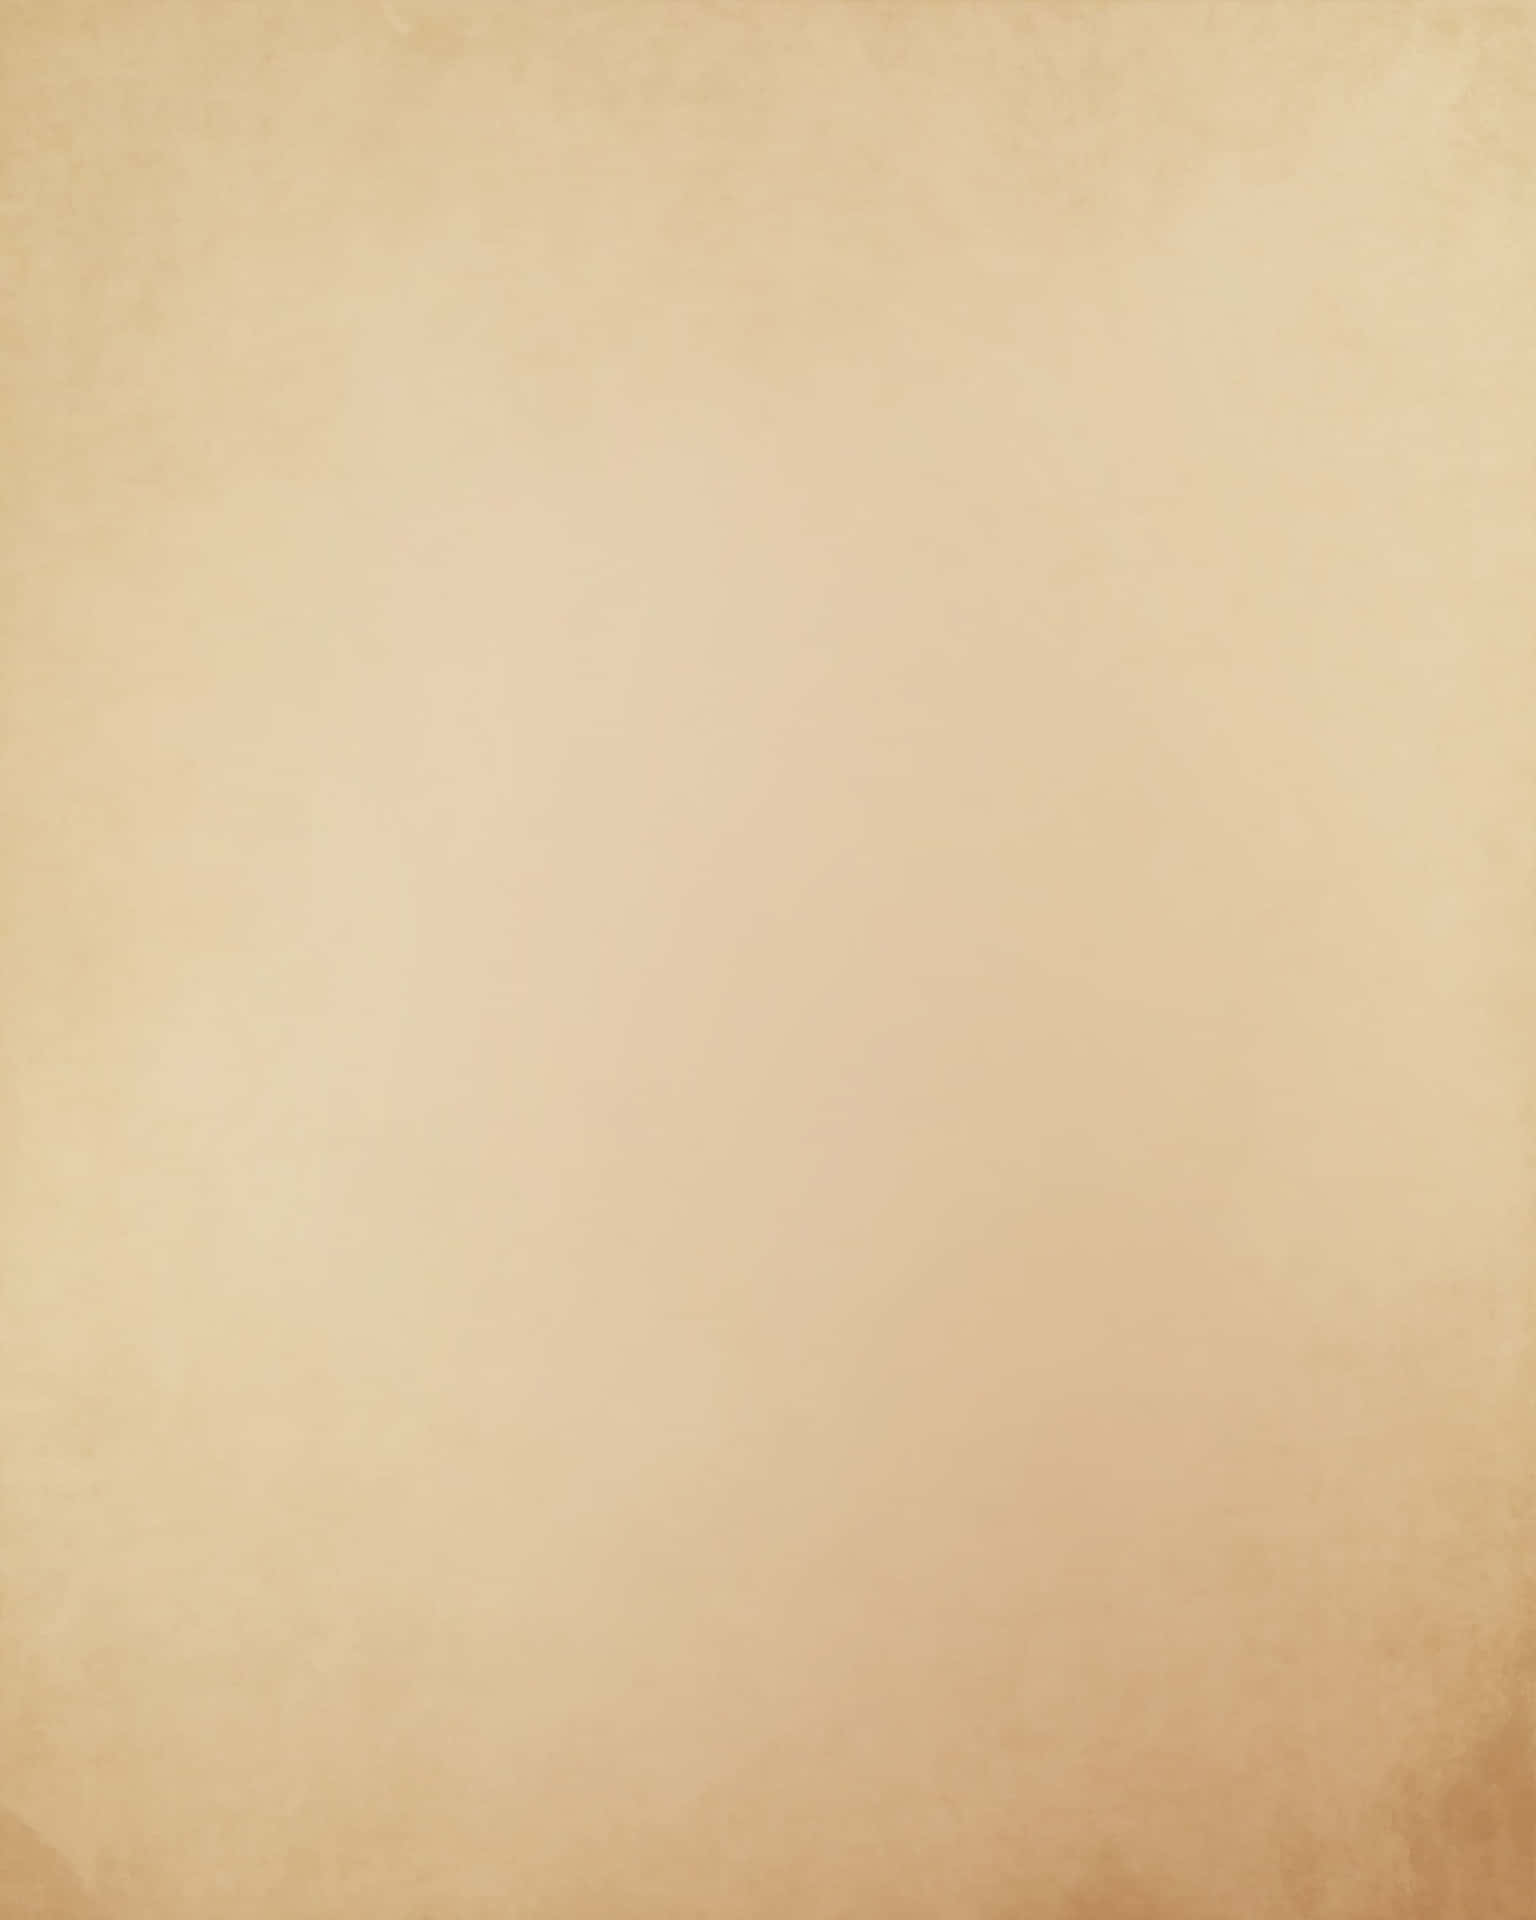 A Beige Paper Background With A White Border